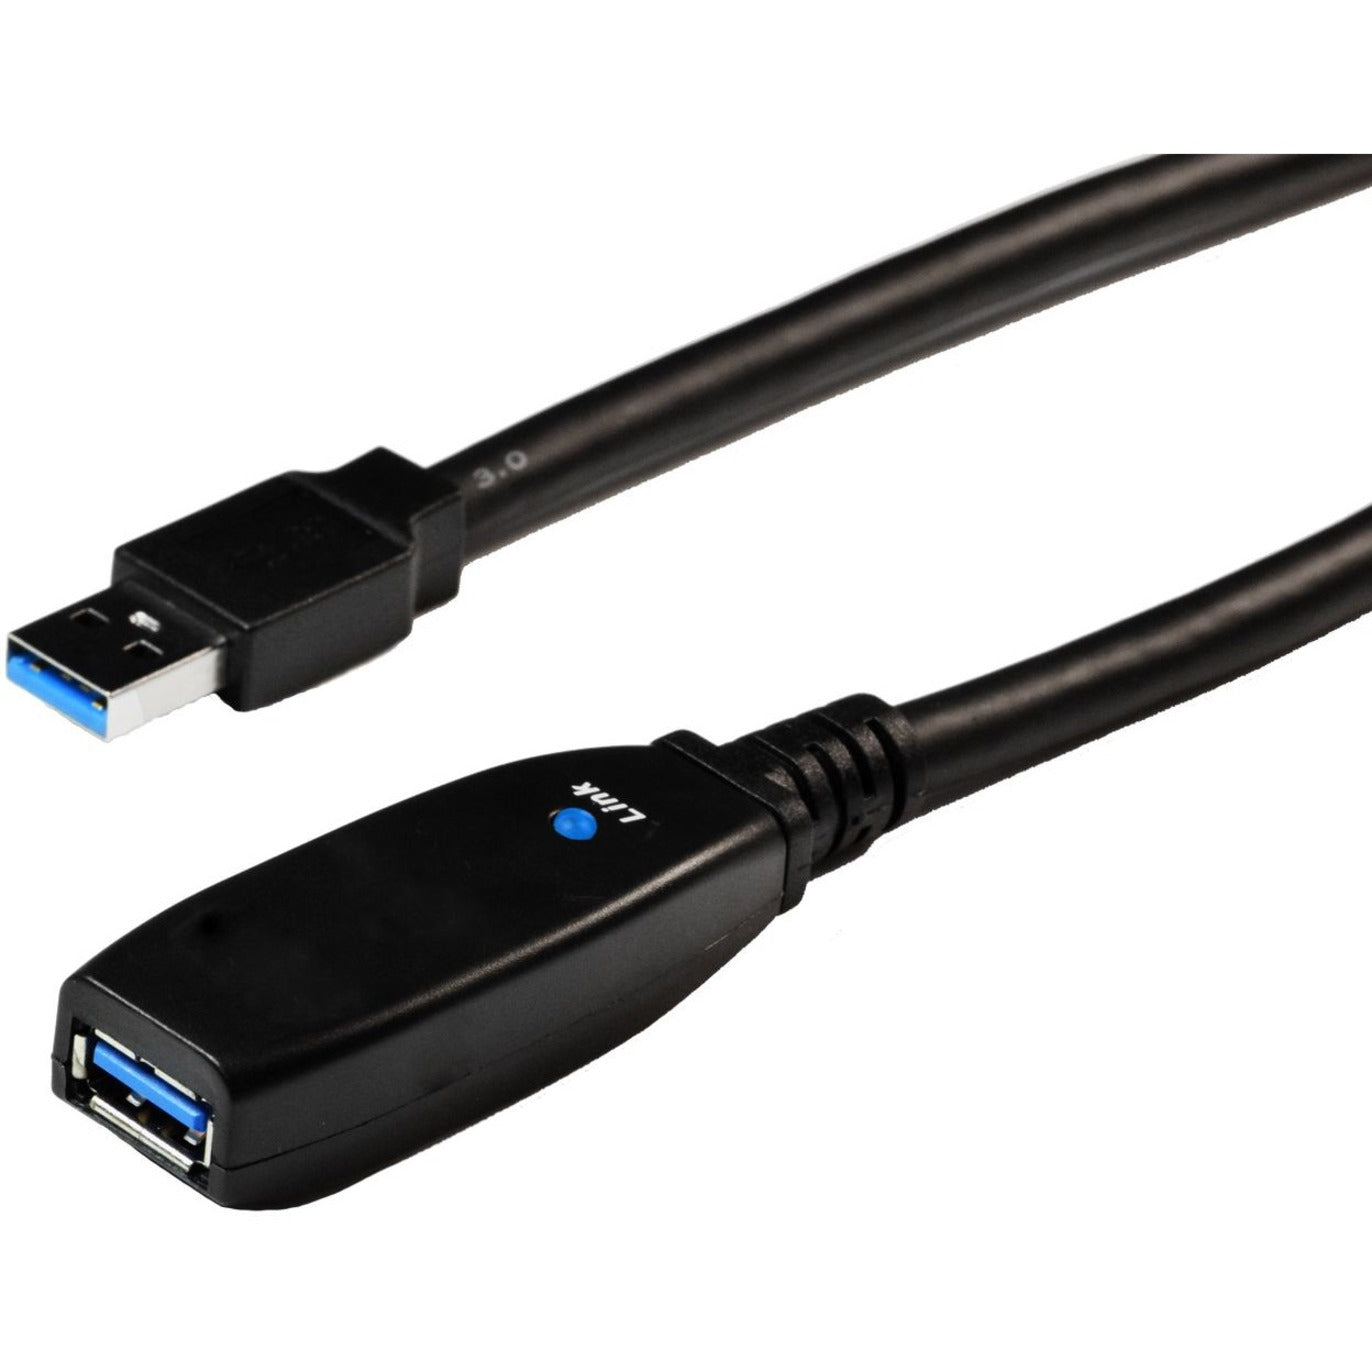 4XEM 4X3302A27M 7M Active USB 3.0 Extension Cable with LED Signal, Plug & Play, Triple Shielded